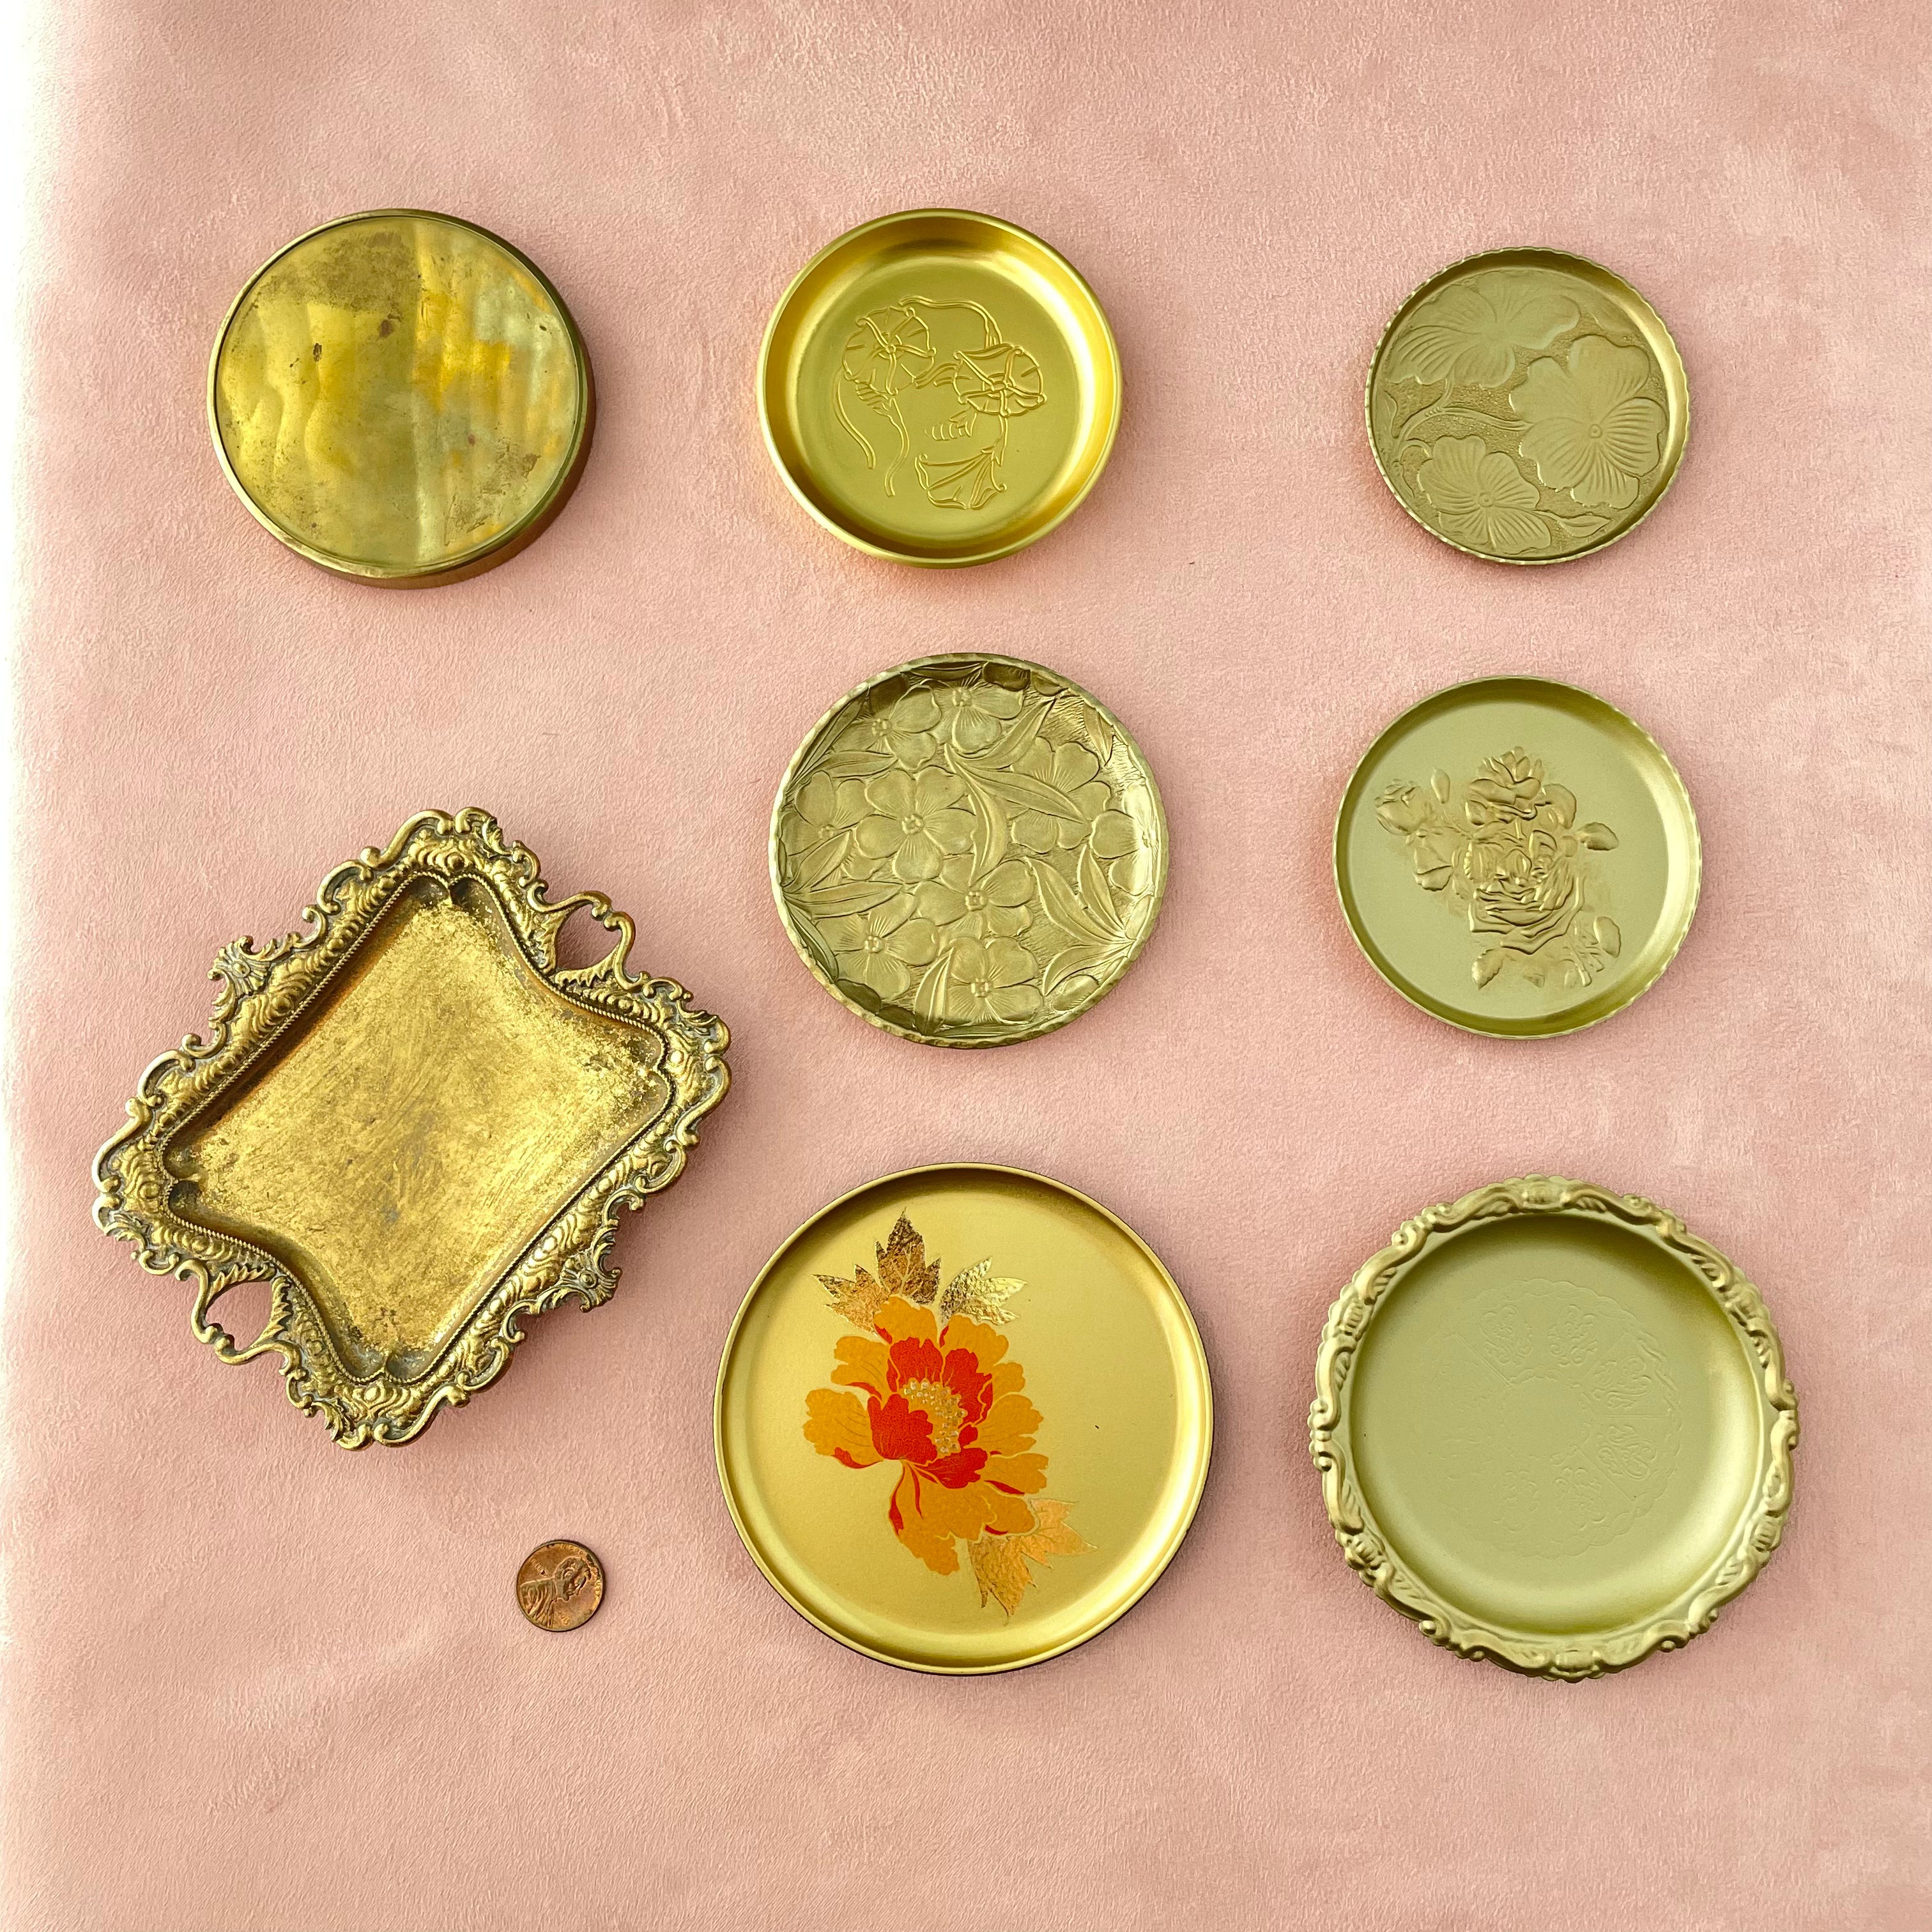 8 vintage gold ring dishes and trays for flat lays from Champagne & GRIT